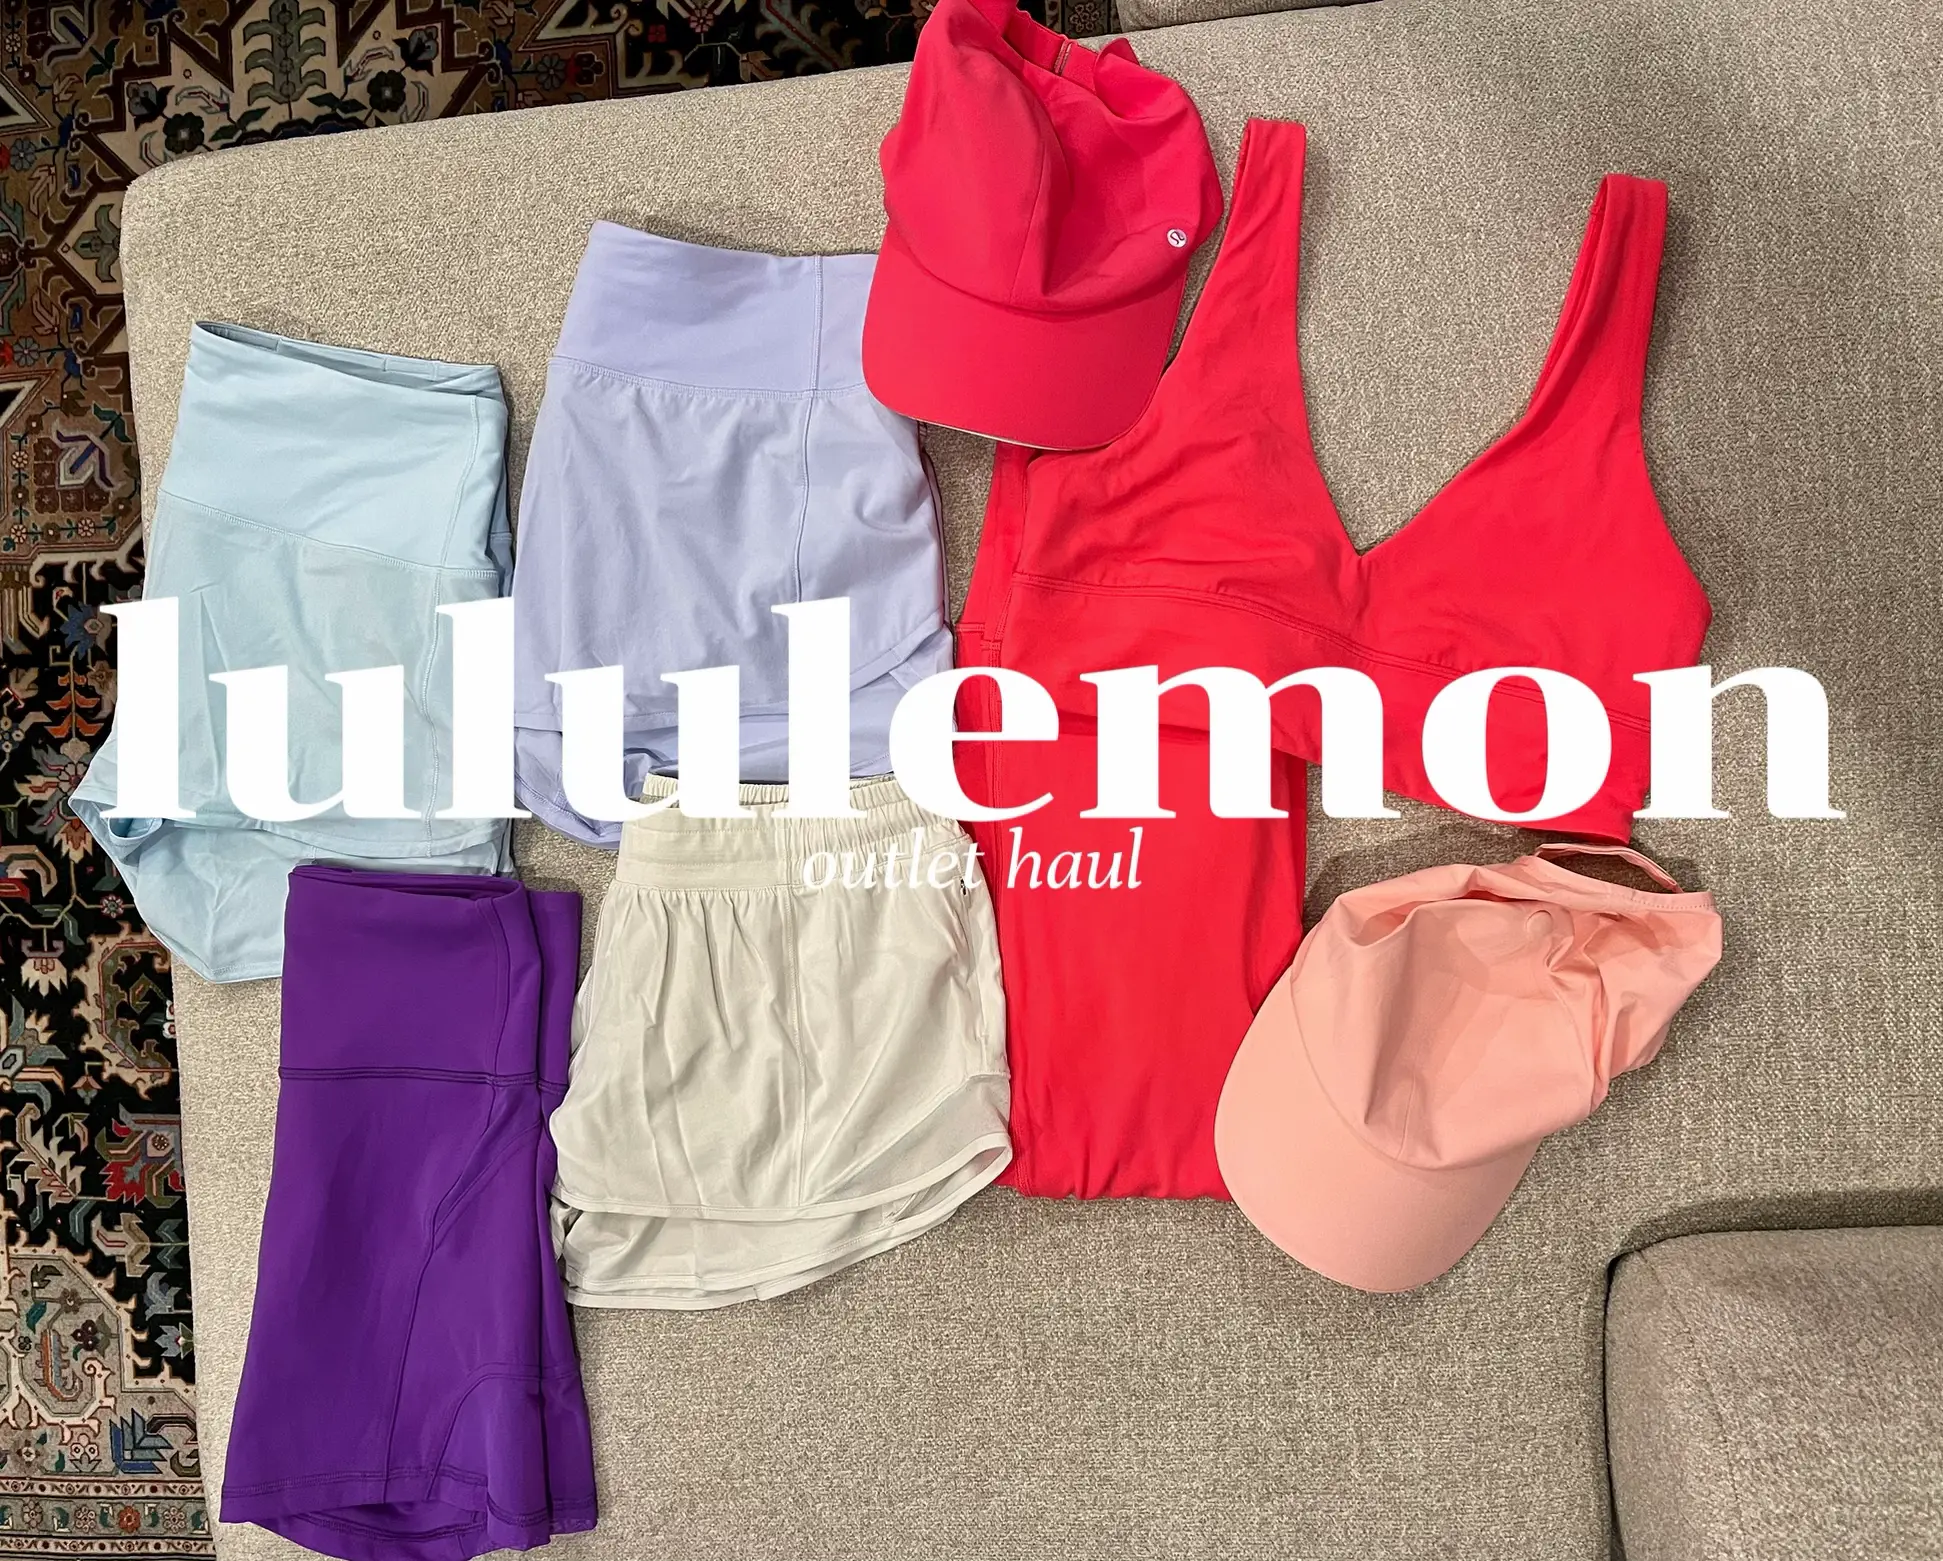 lululemon outlet haul, Gallery posted by Jordy